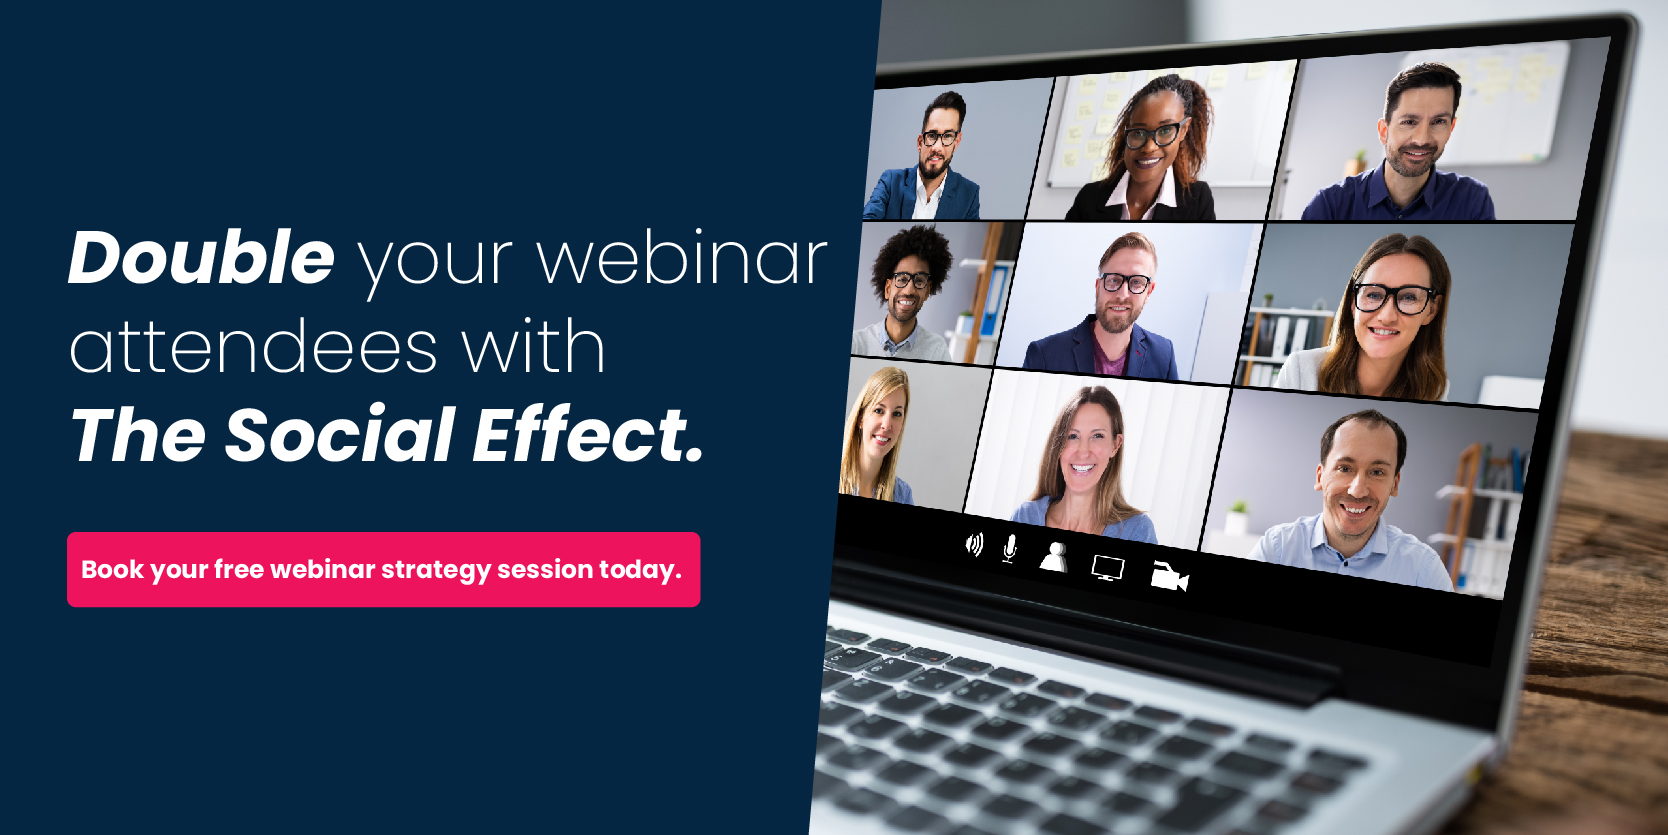 Double Your webinar attendees with The Social Effect